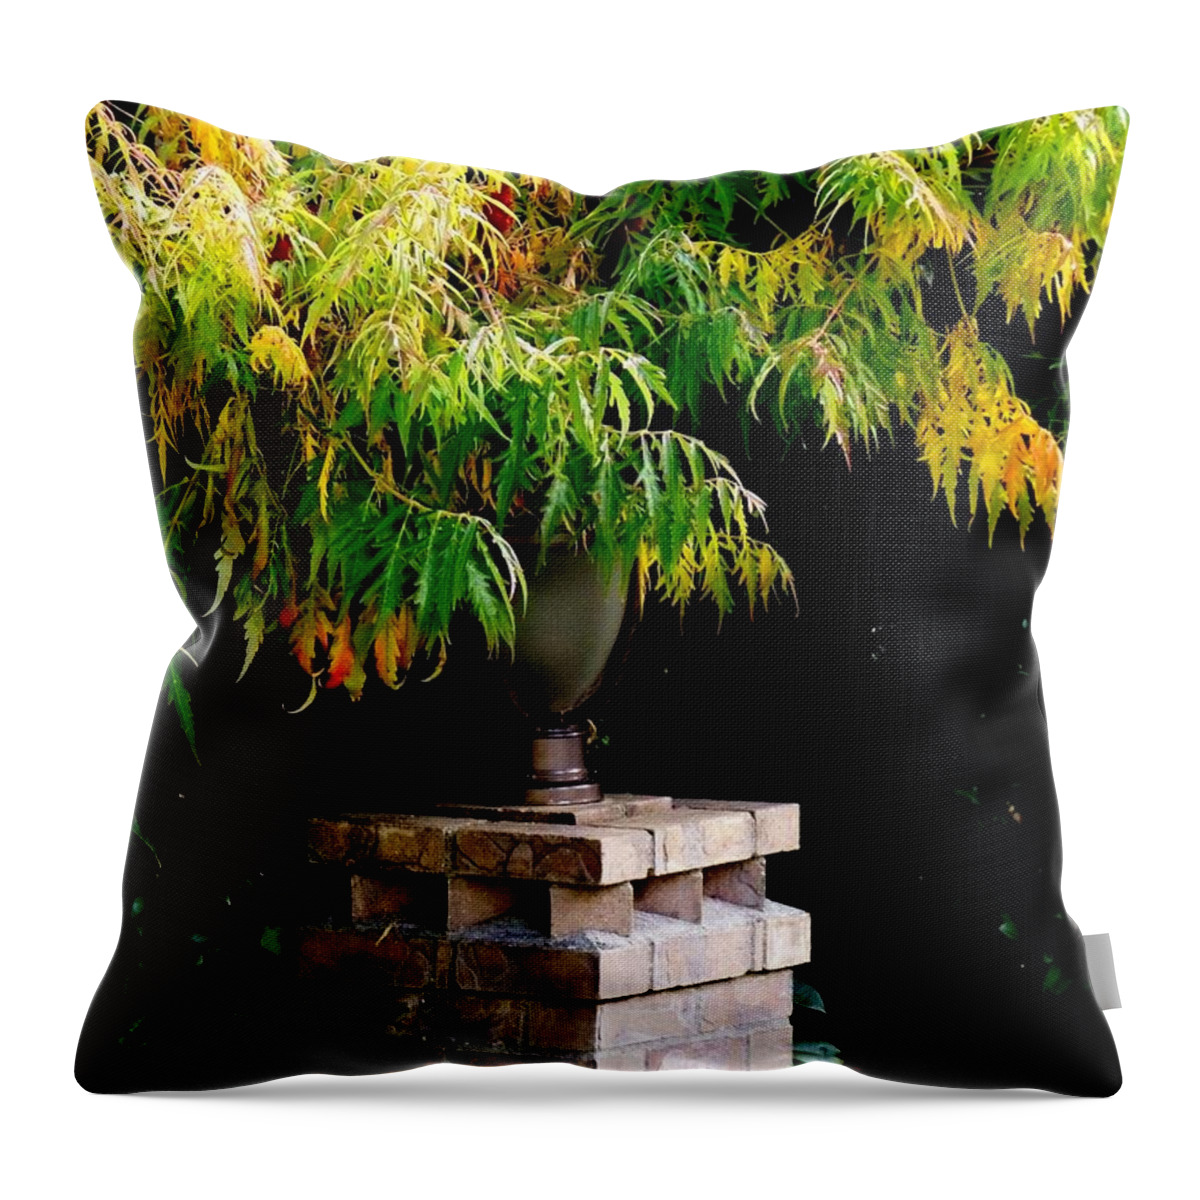 Autumn Throw Pillow featuring the photograph Autumn 2 by Tatyana Searcy